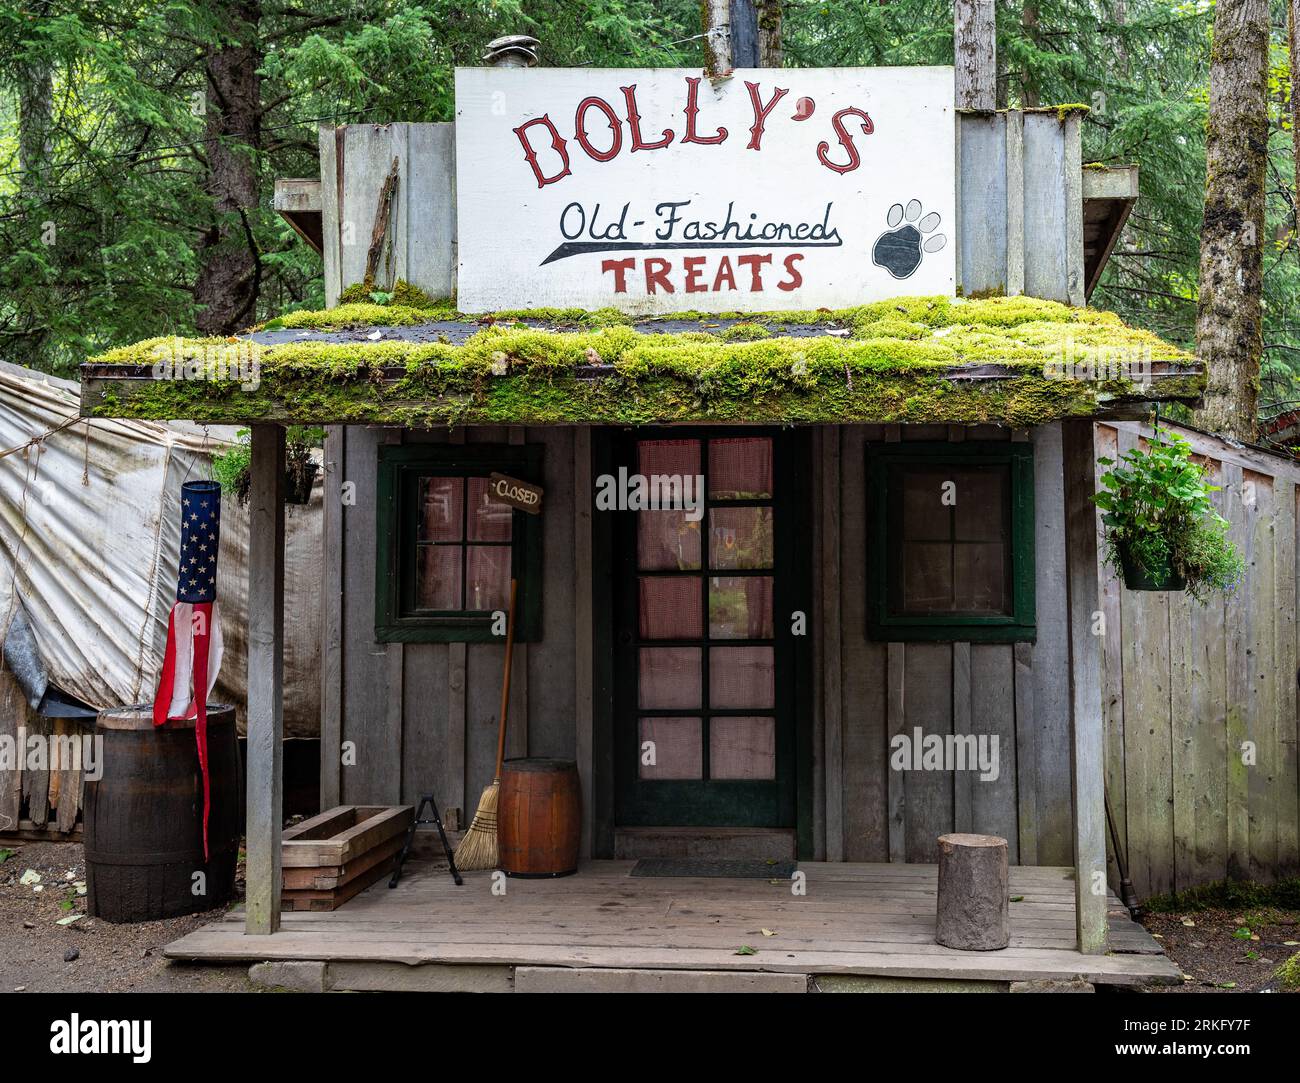 An old-fashioned store located in a remote area surrounded by trees Stock Photo